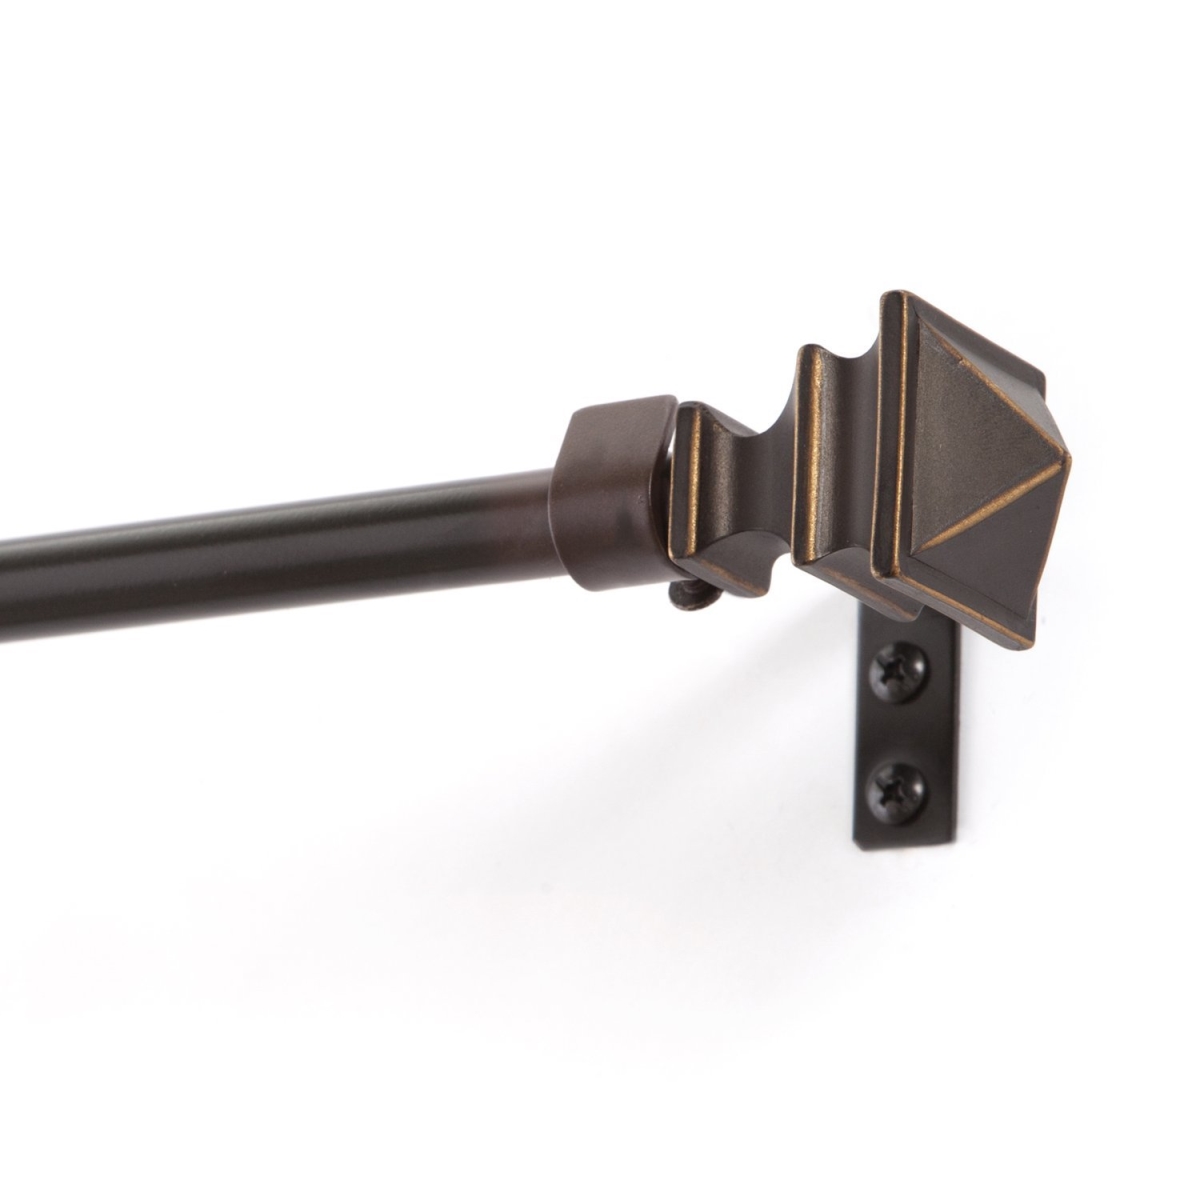 32-lwf1003-2orb 48-88 In. Painted Oil Rubbed Bronze Finish Single Rod Window Hardware With Ribbed Resin Finial